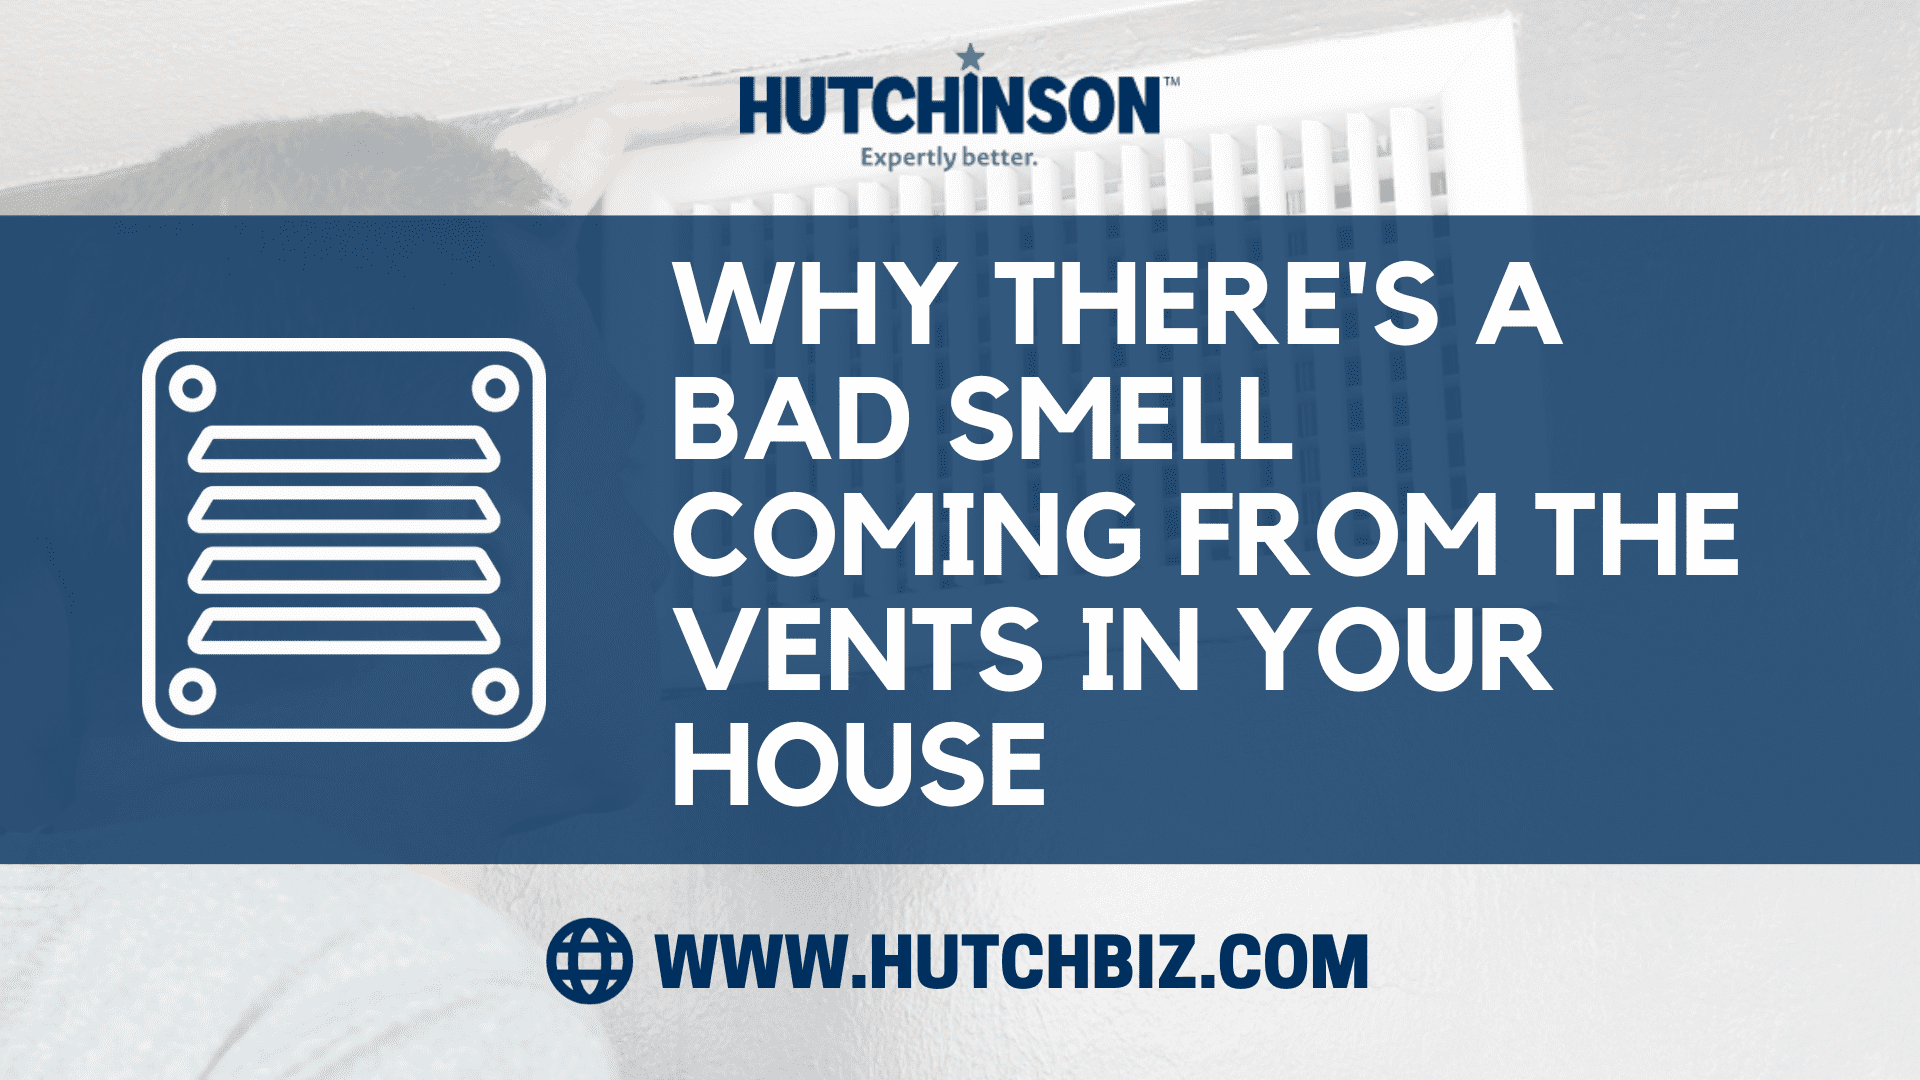 Why There’s a Bad Smell Coming from the Vents in Your House